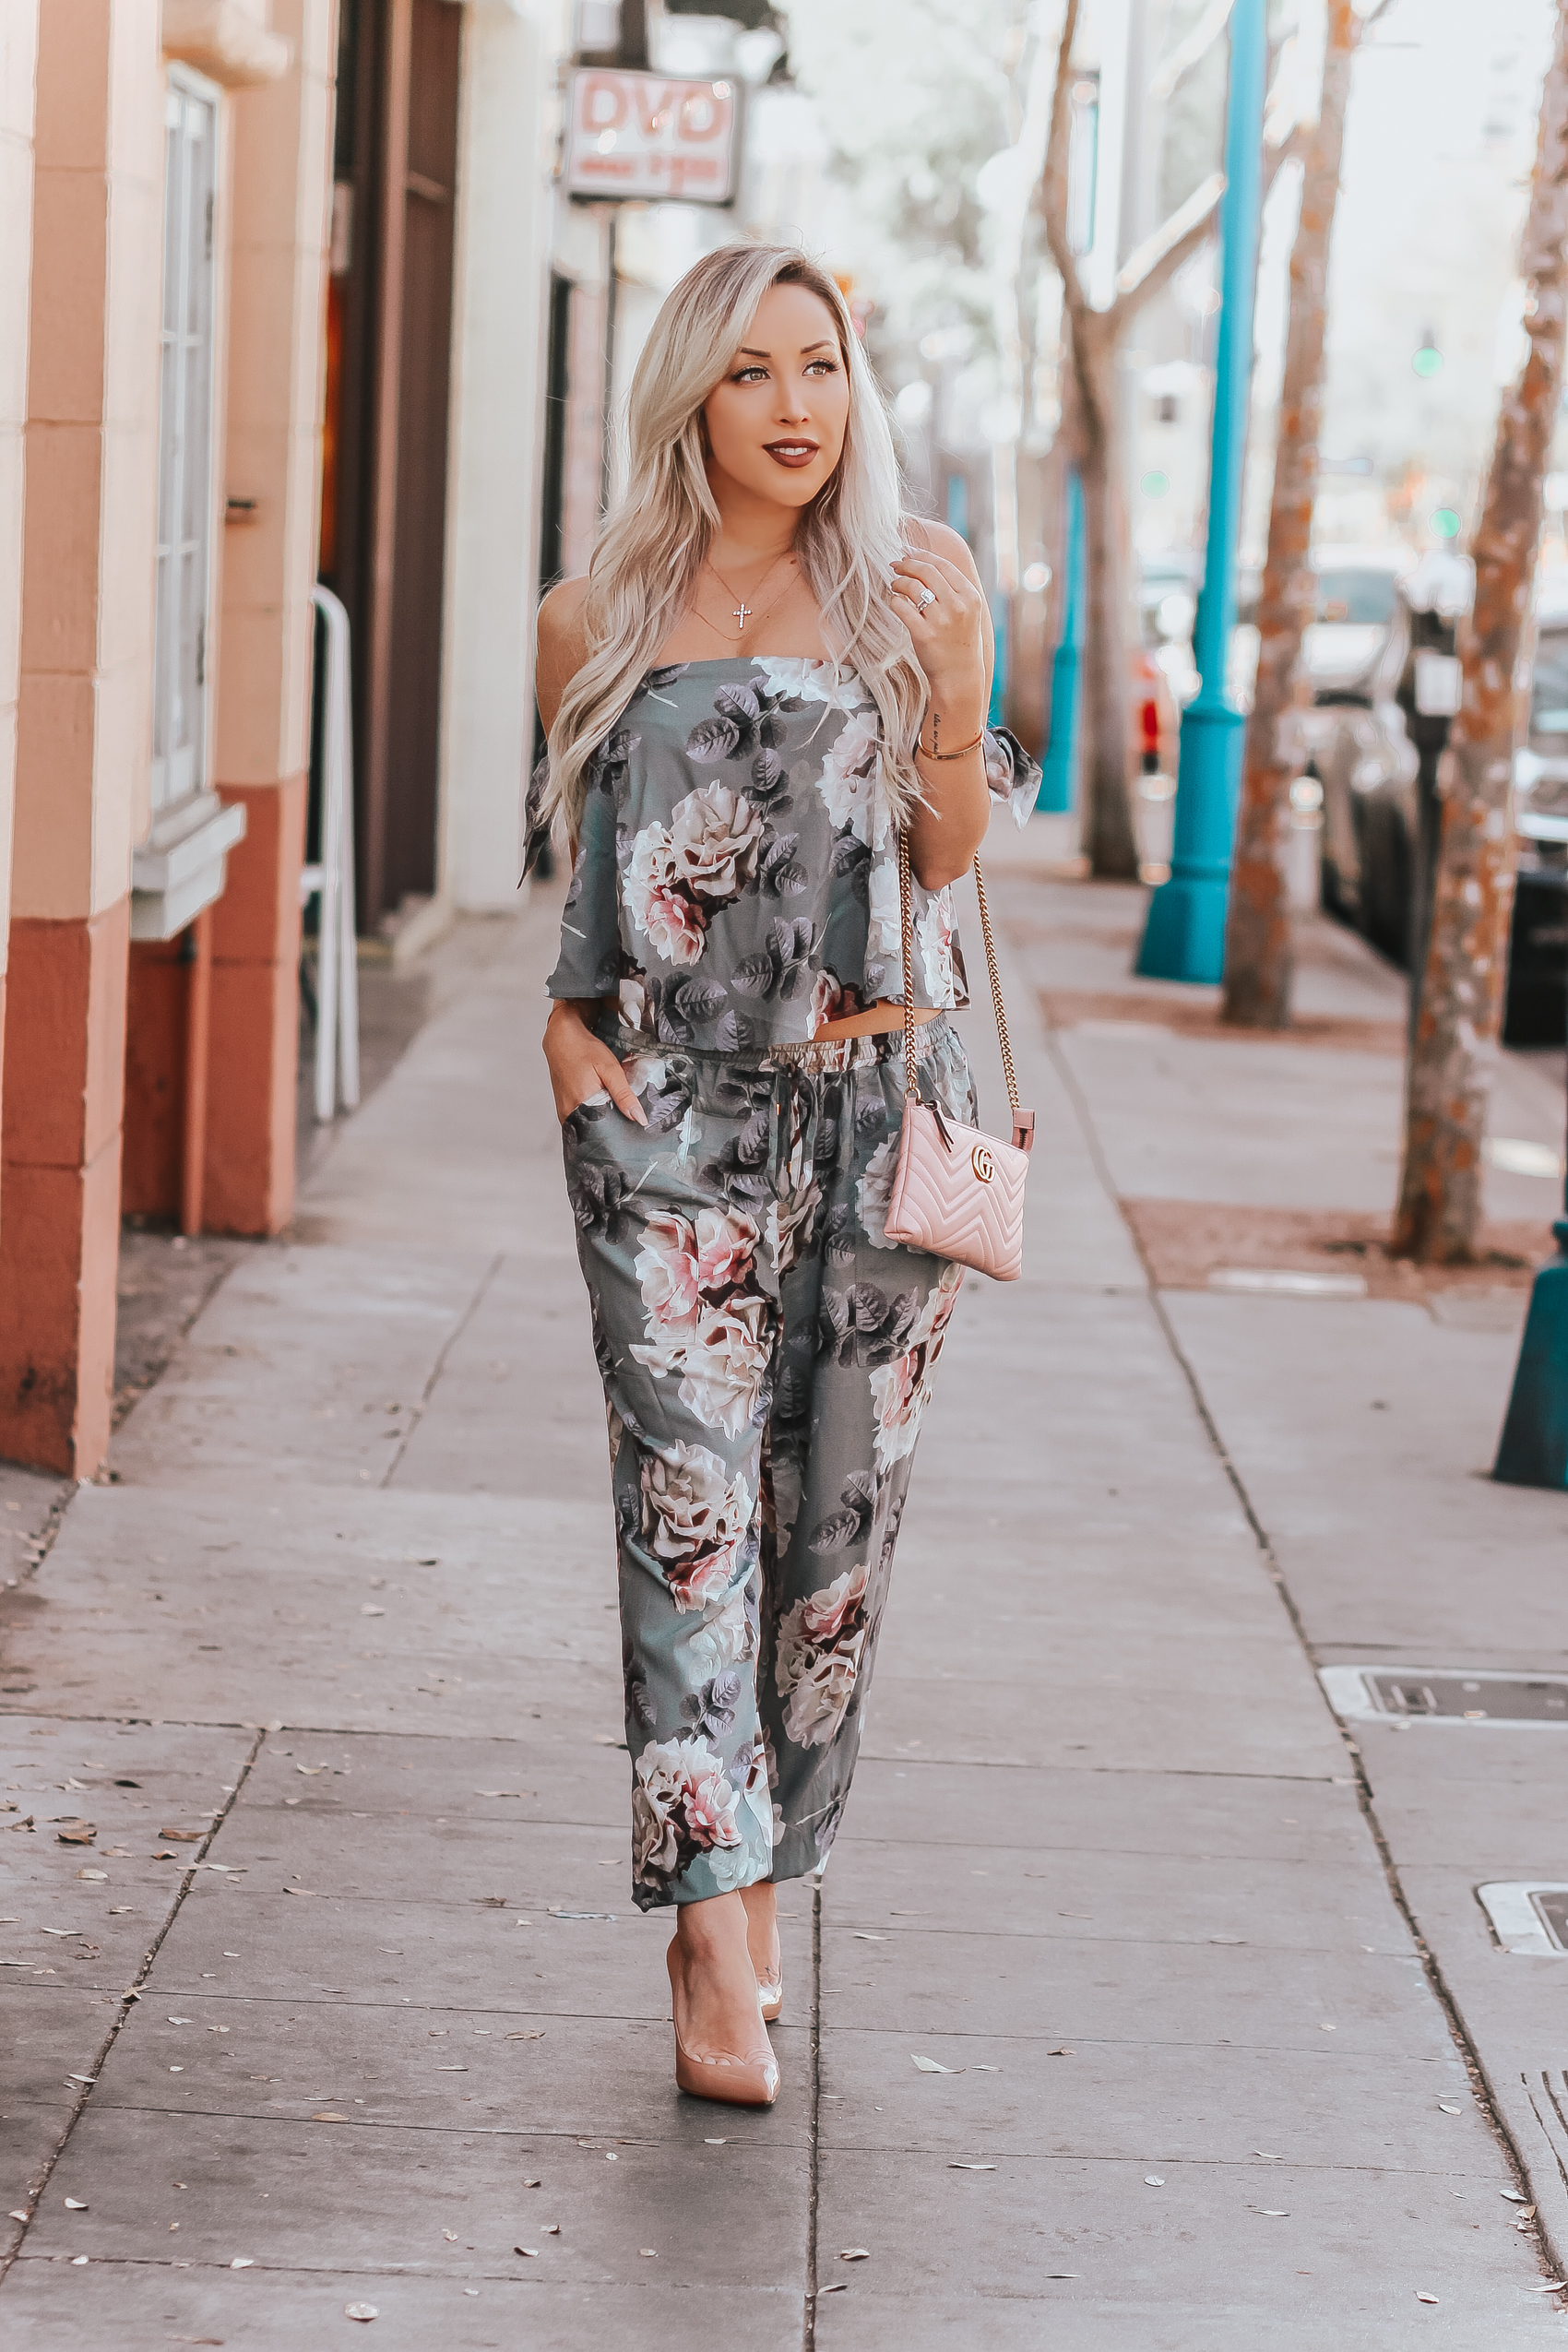 6 Outfits For Spring | Spring Fashion | Blondie in the City by Hayley Larue